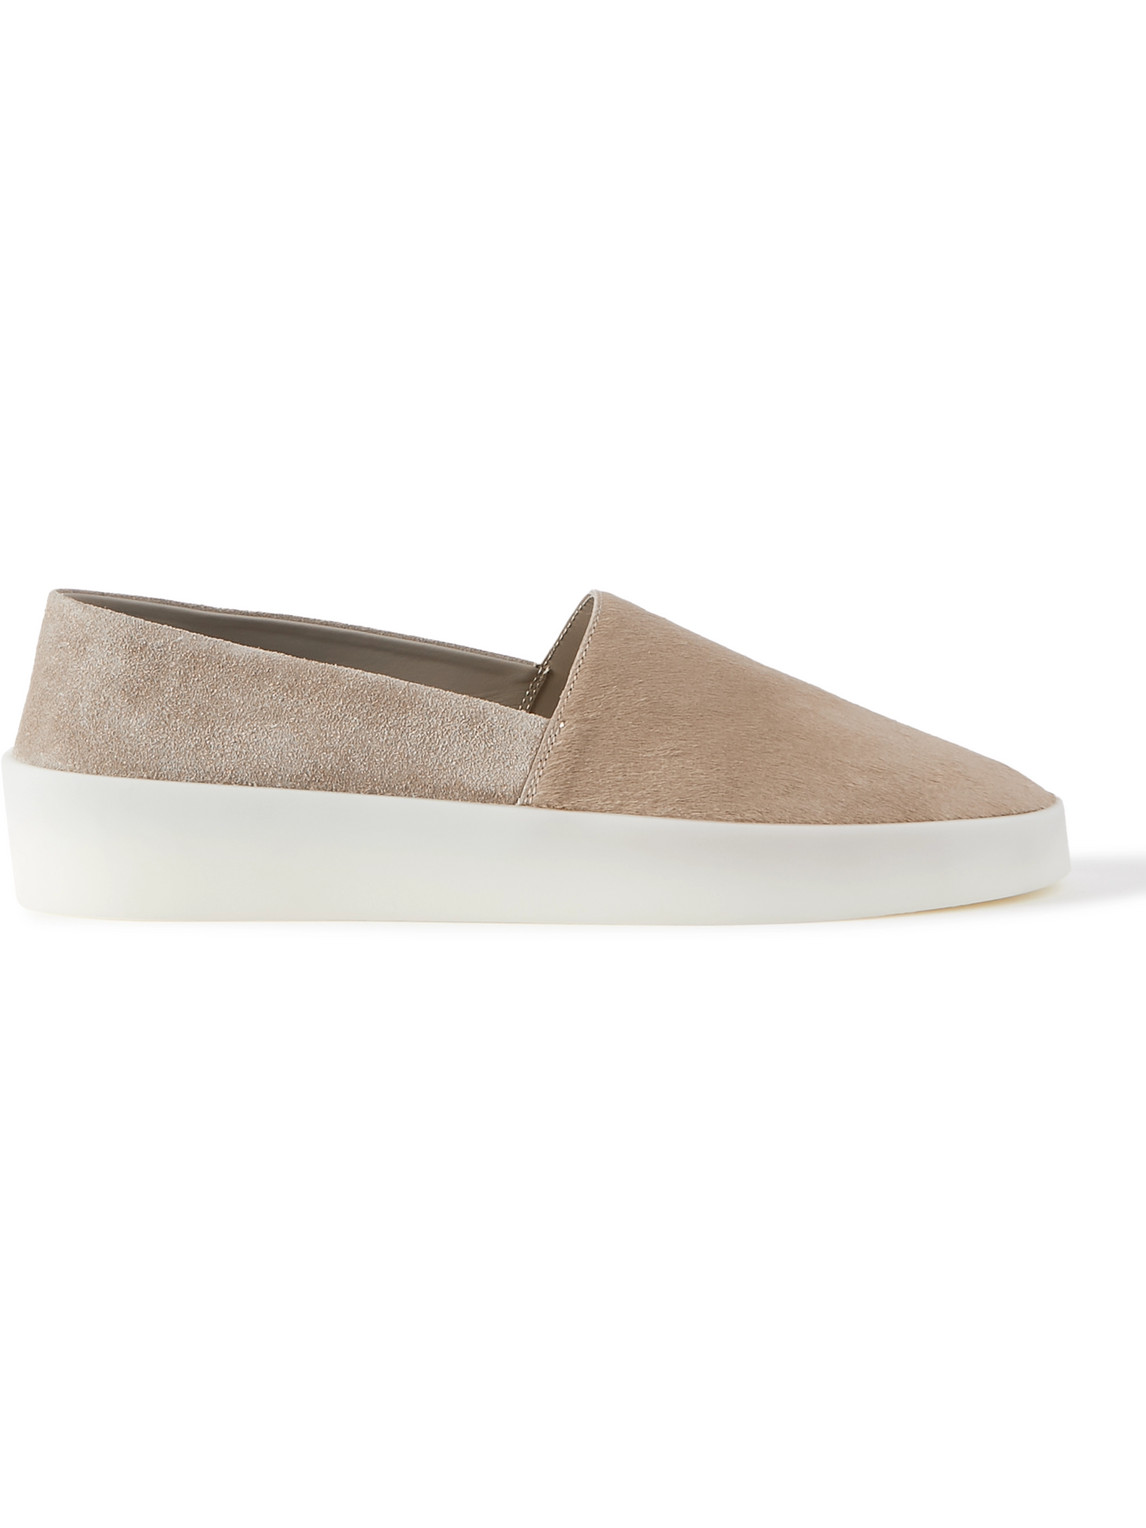 Pony Hair and Suede Espadrilles